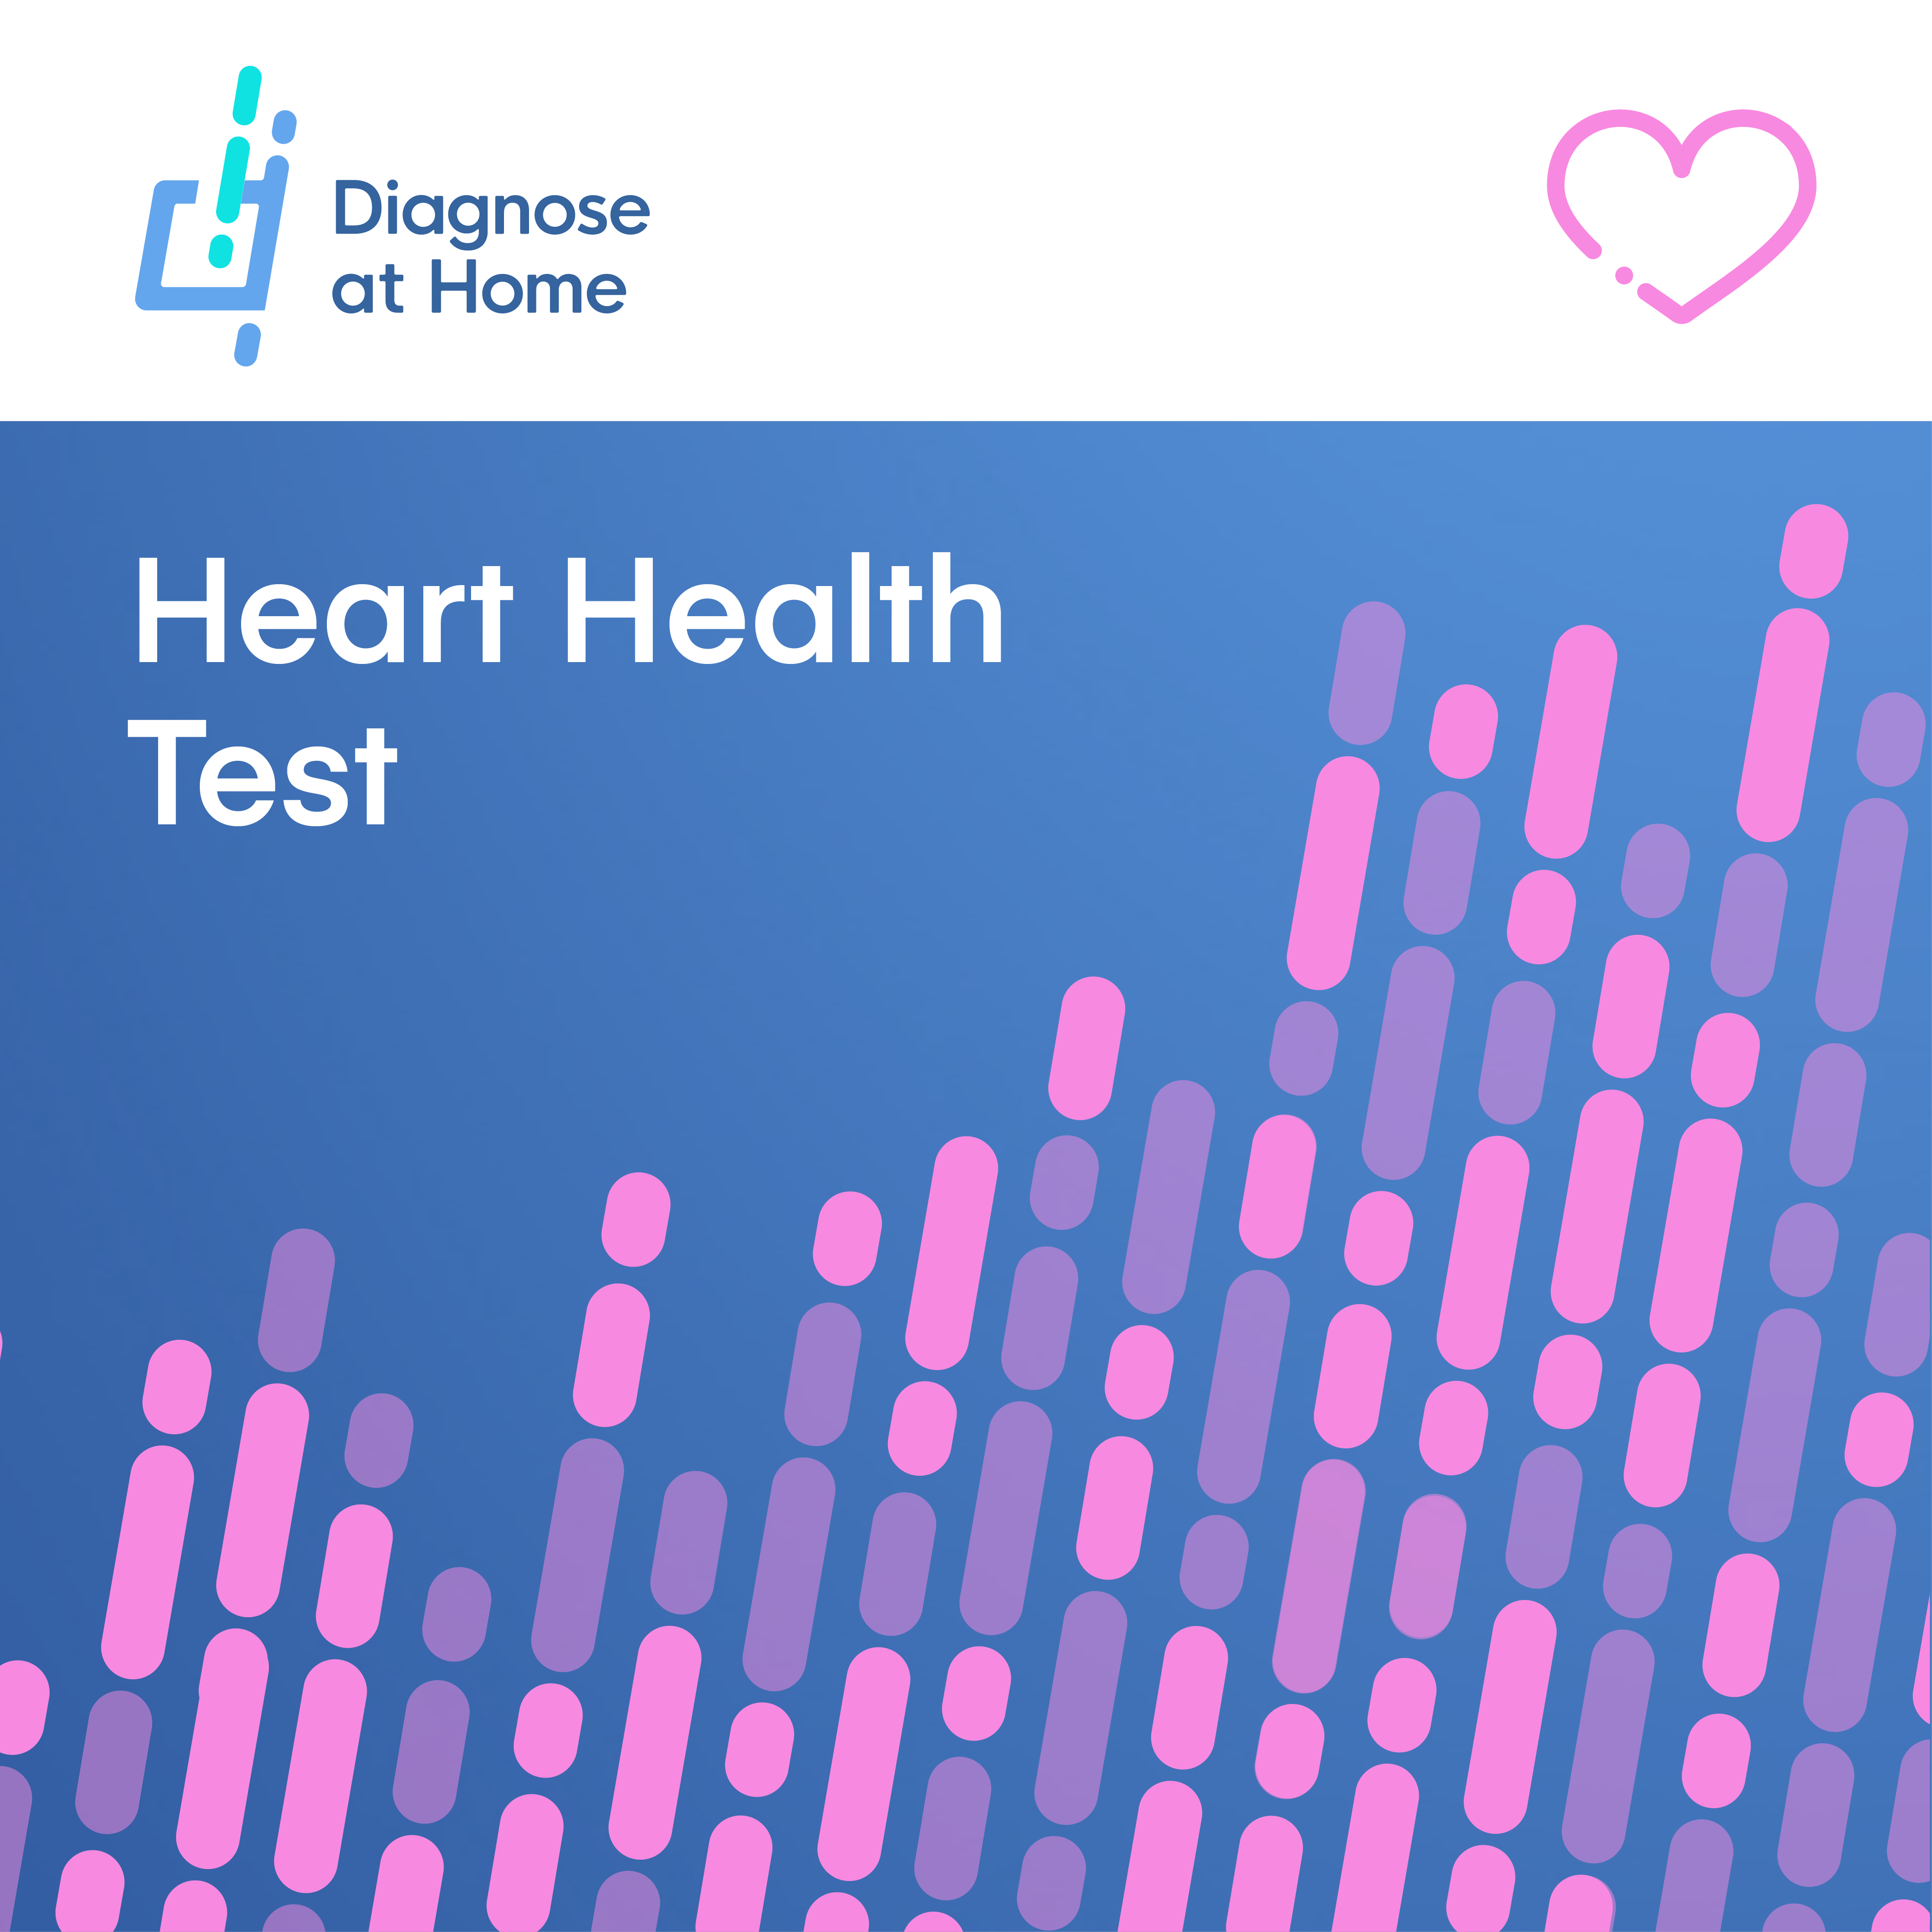 Heart Health Test cover image